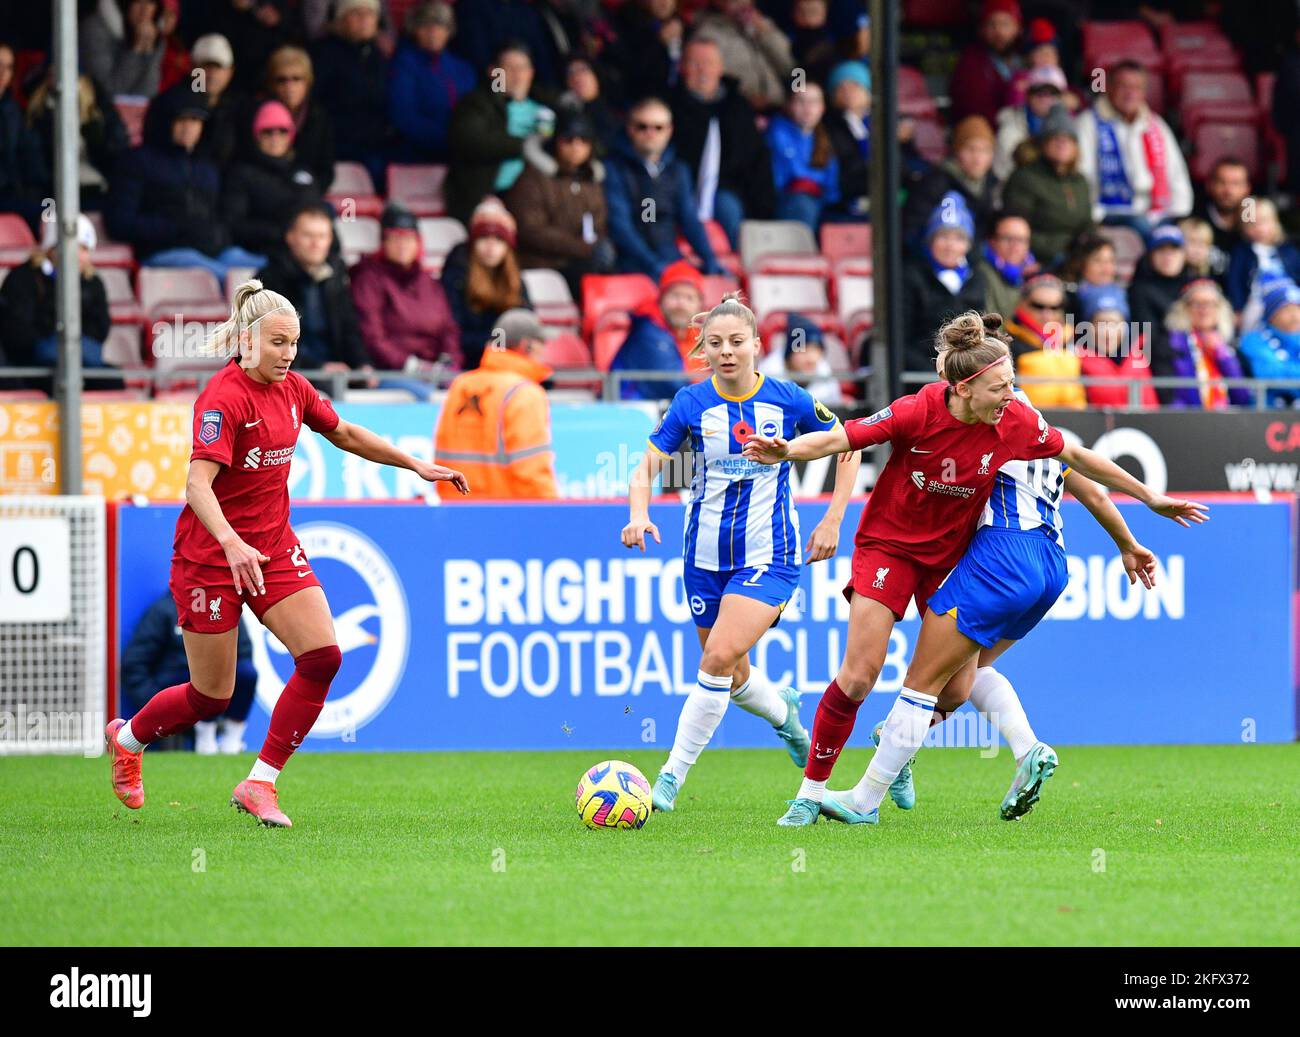 Crawley, UK. 20th Nov, 2022. Yana Daniels of Liverpool is played off the ball by Veatriki Sarri of Brighton and Hove Albion and Julia Zigiotti Olme of Brighton and Hove Albion during the FA Women's Super League match between Brighton & Hove Albion Women and Liverpool Women at The People's Pension Stadium on November 20th 2022 in Crawley, United Kingdom. (Photo by Jeff Mood/phcimages.com) Credit: PHC Images/Alamy Live News Stock Photo